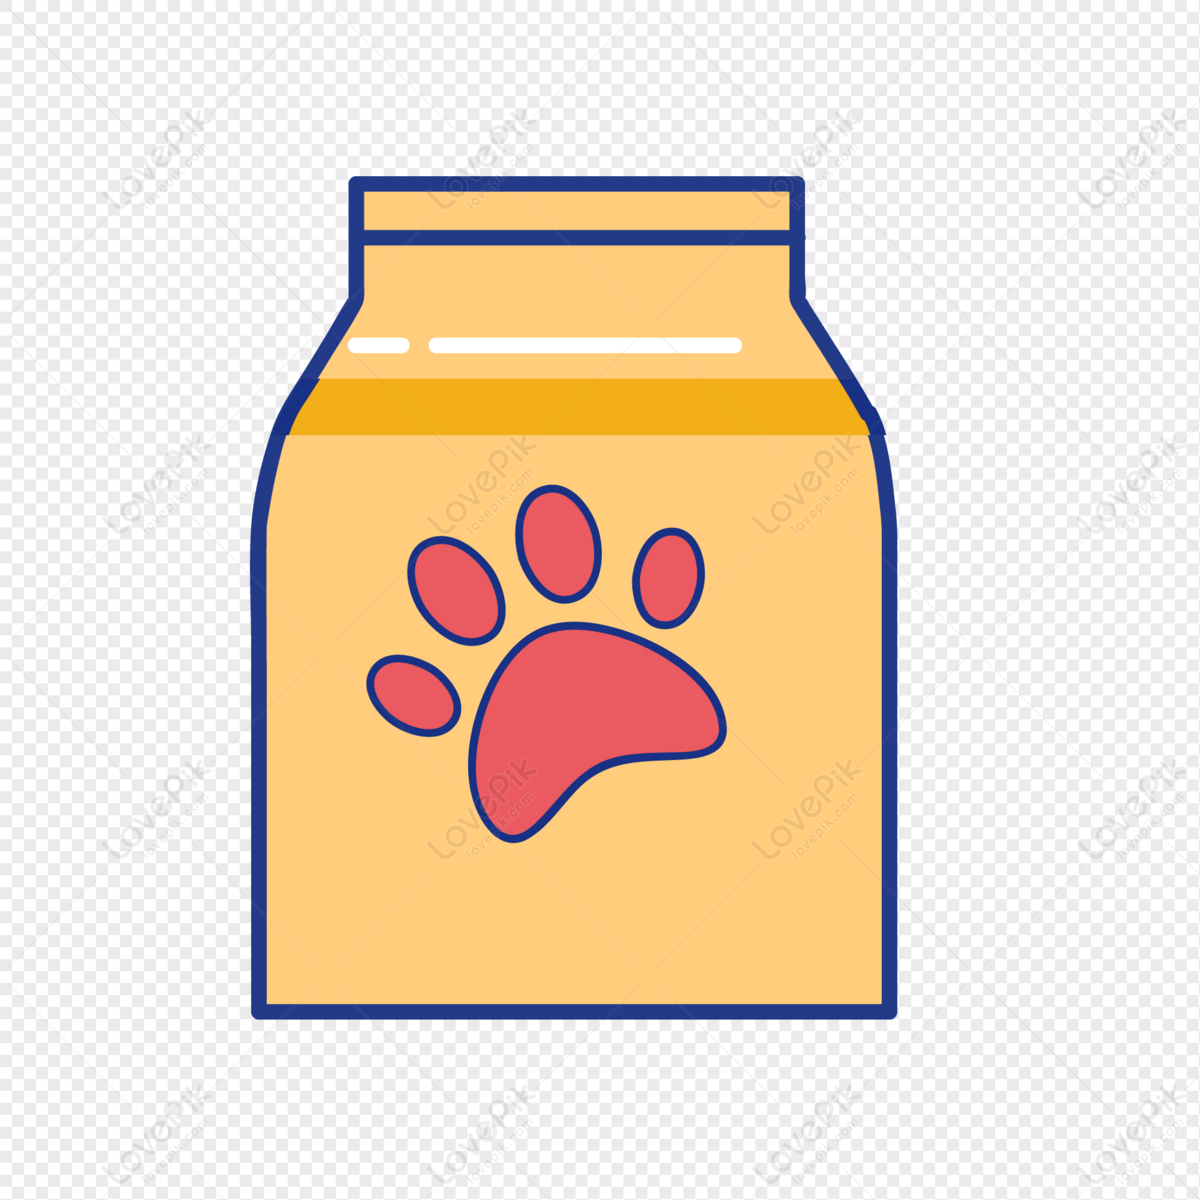 Cat Food PNG Free Download And Clipart Image For Free Download - Lovepik |  401703763